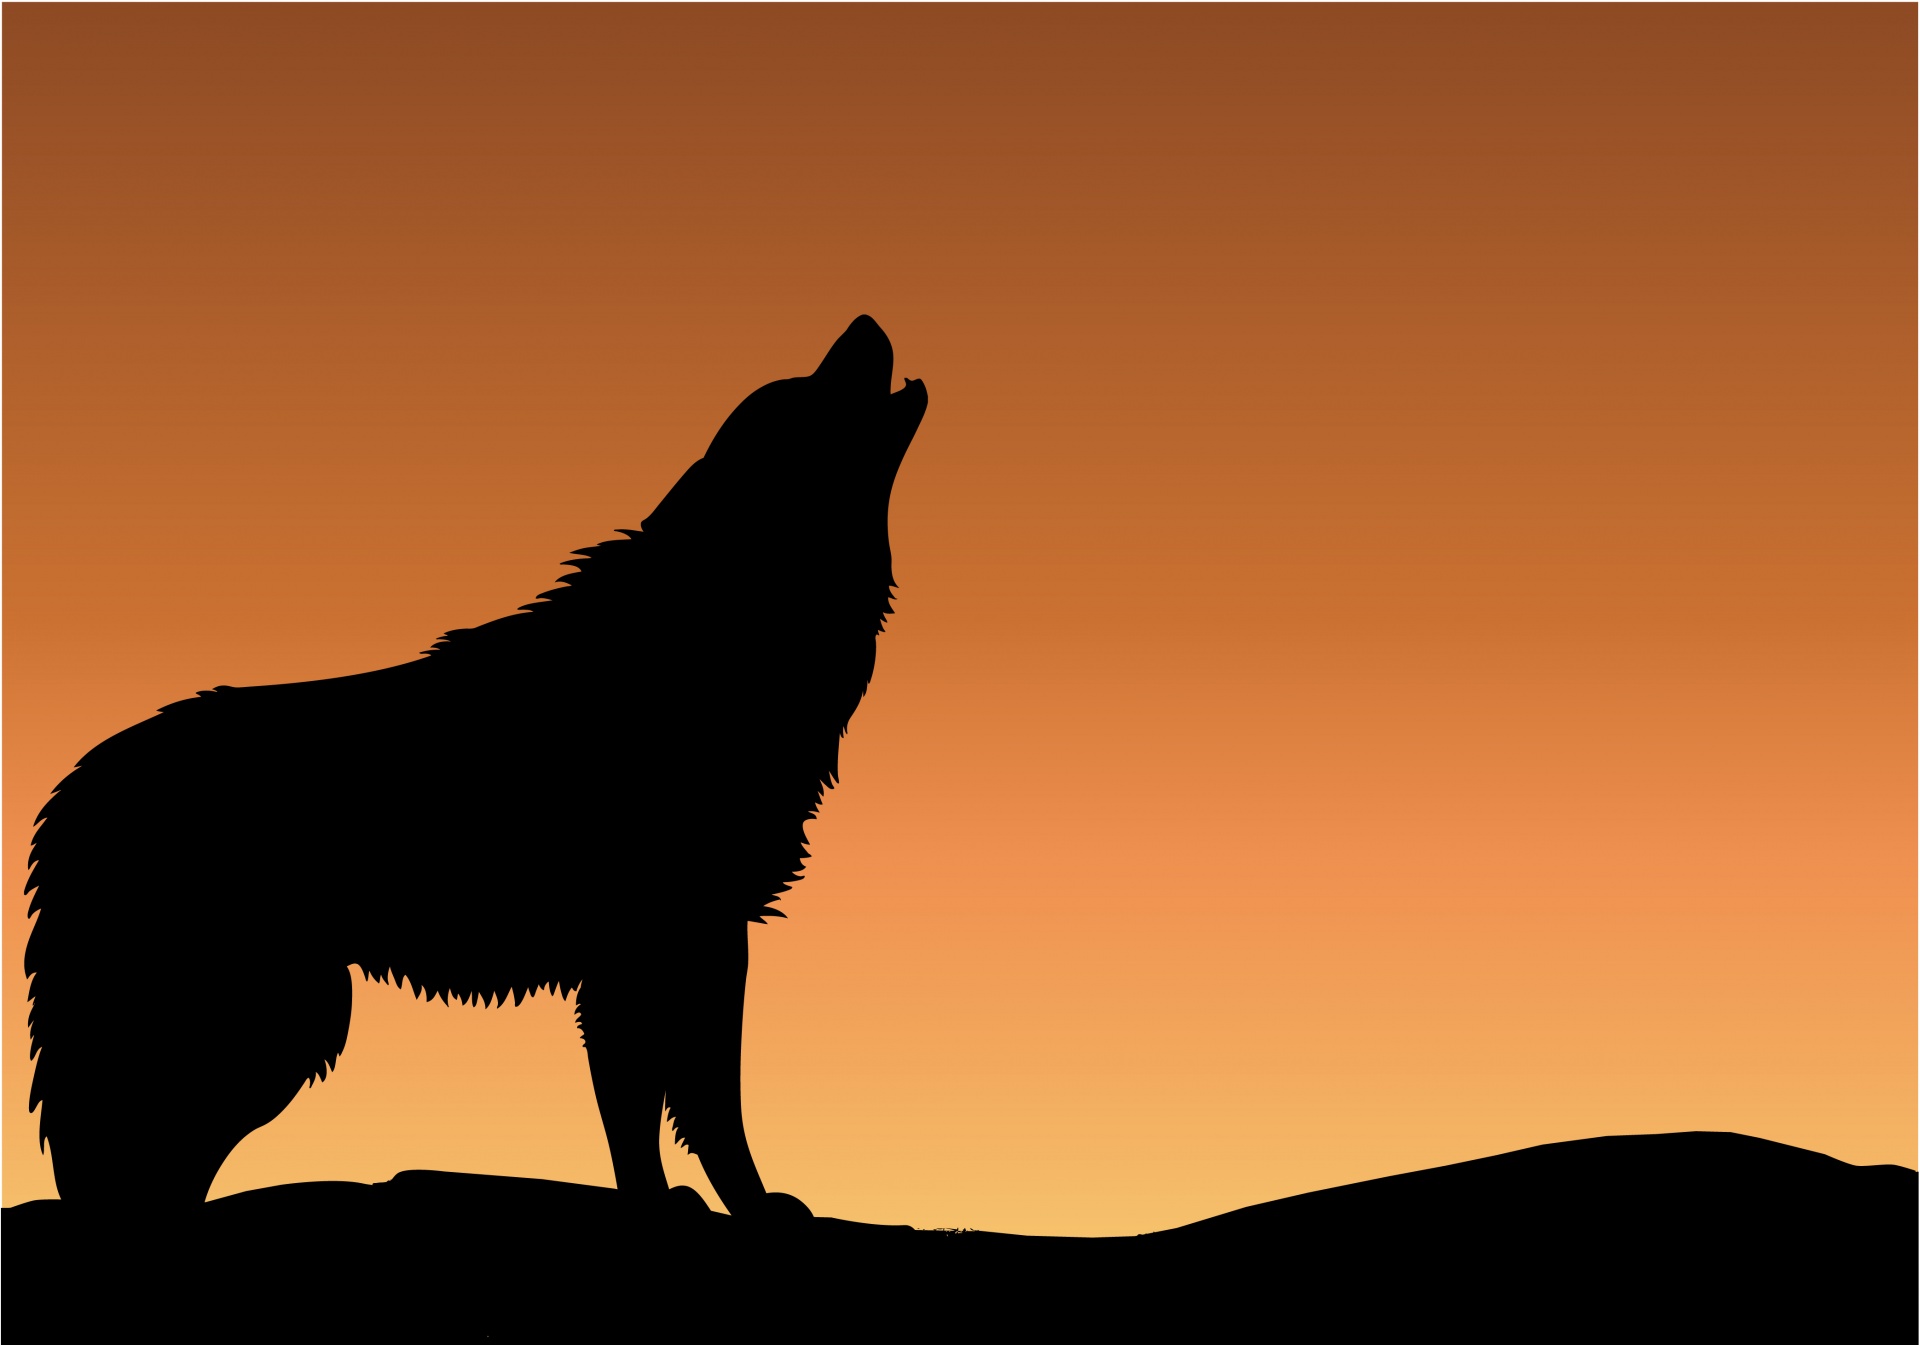 Howling wolf at sunset silhouette